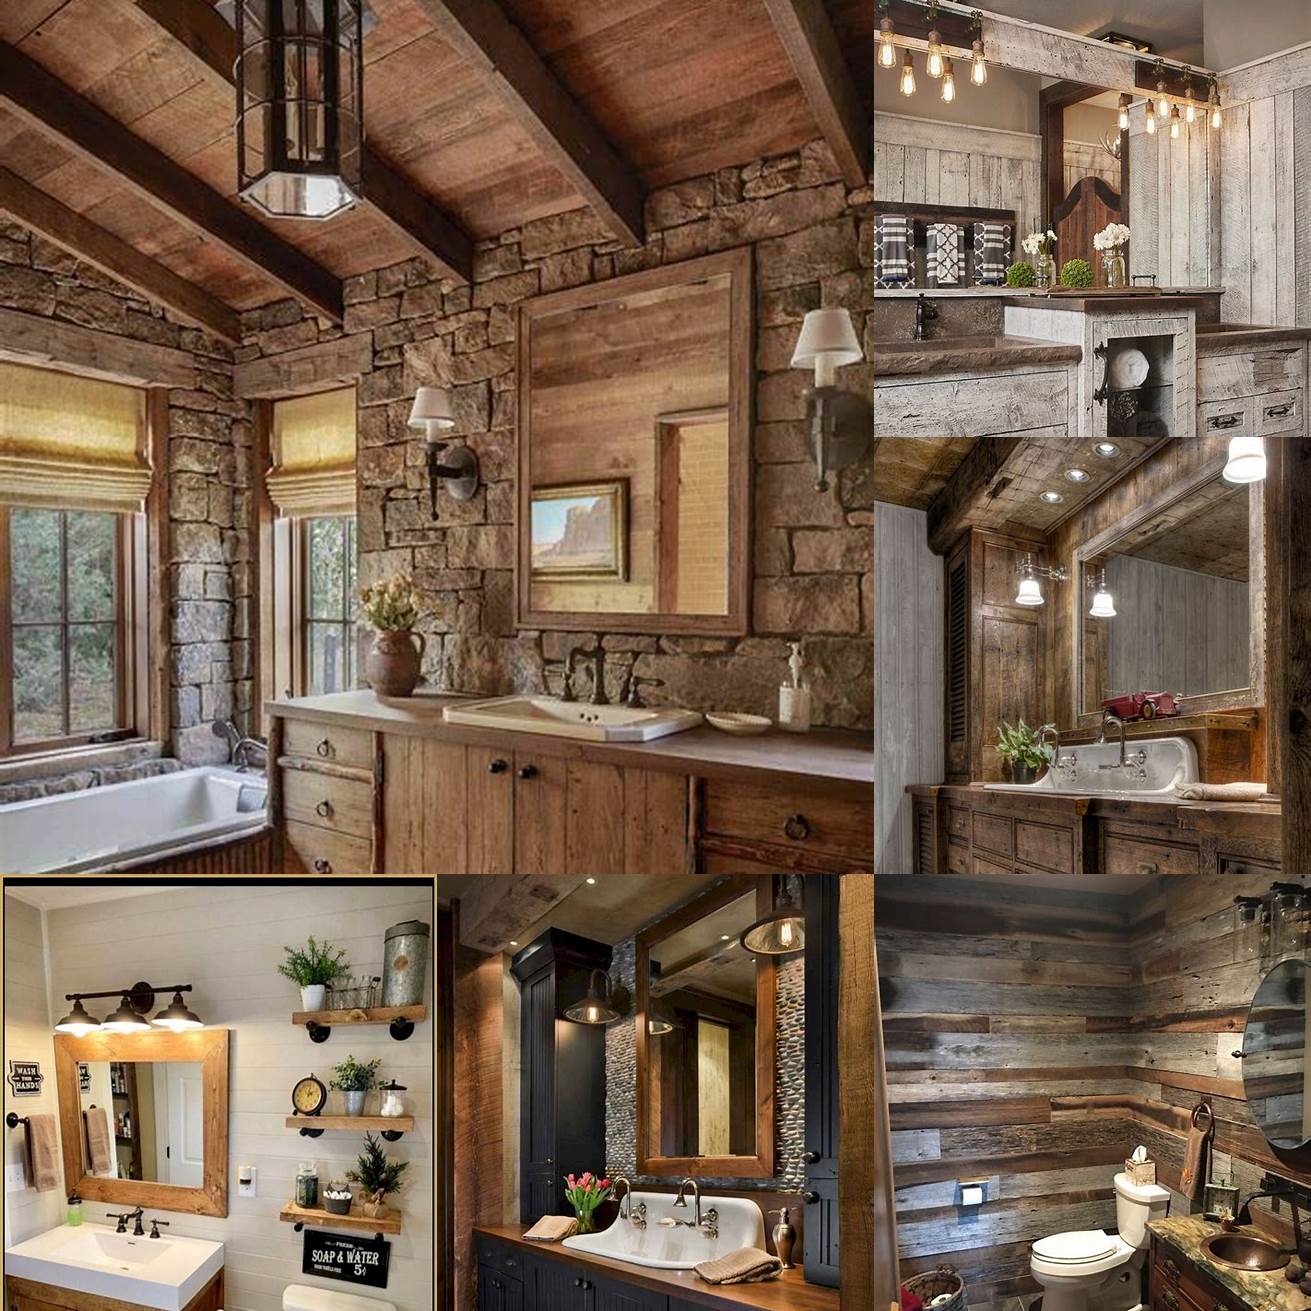 Unique and rustic design that adds character and charm to your bathroom